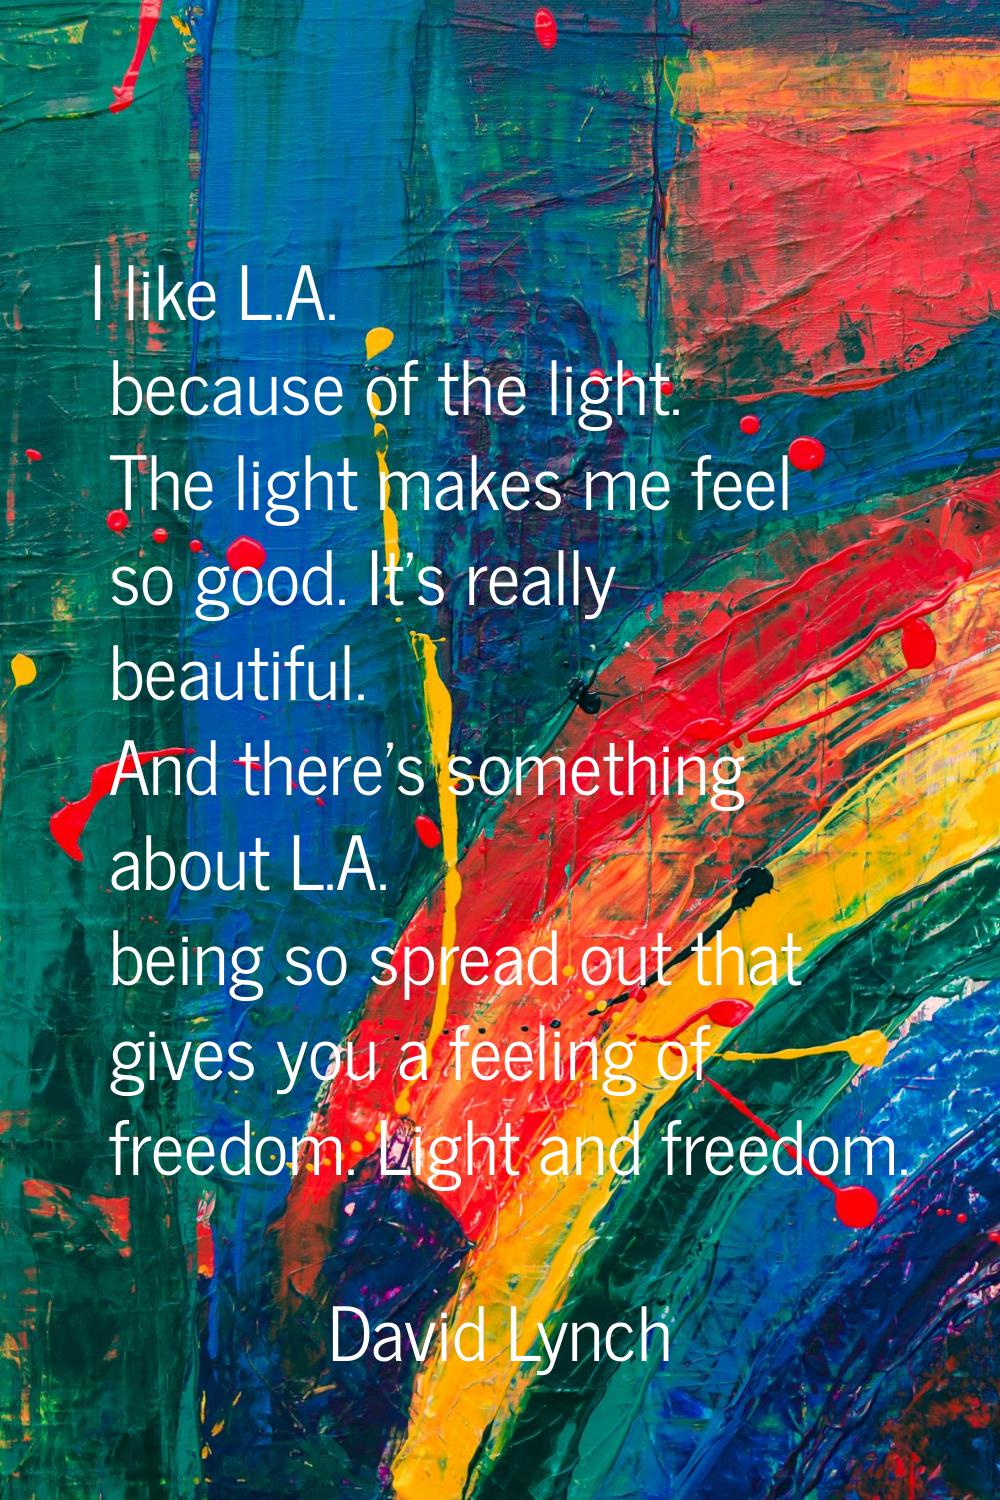 I like L.A. because of the light. The light makes me feel so good. It's really beautiful. And there